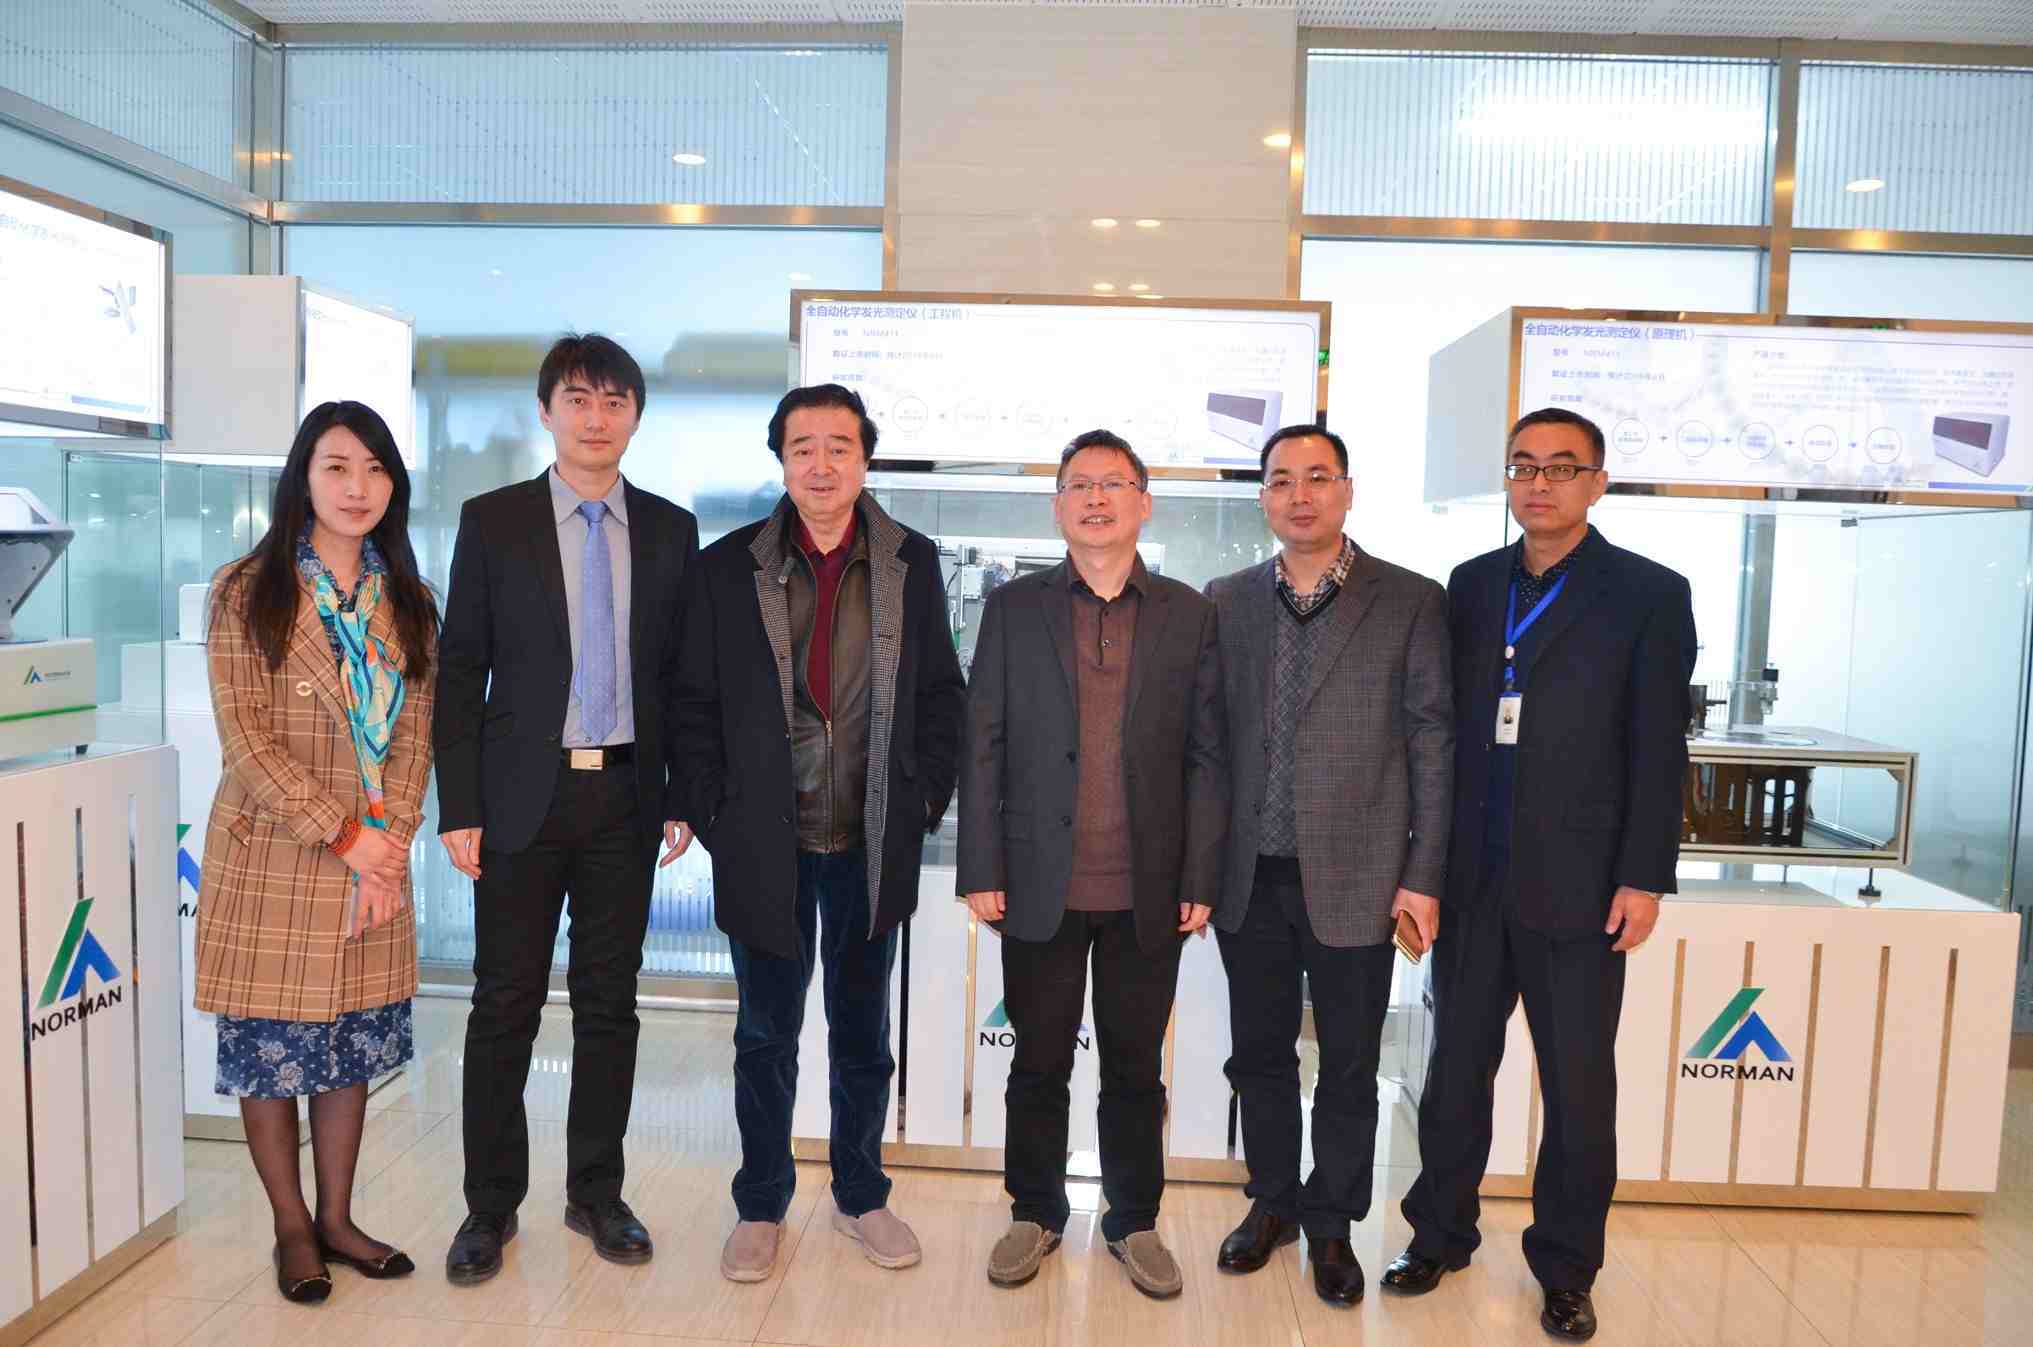 Professor Yulong Cong inspected Norman on 28th, March